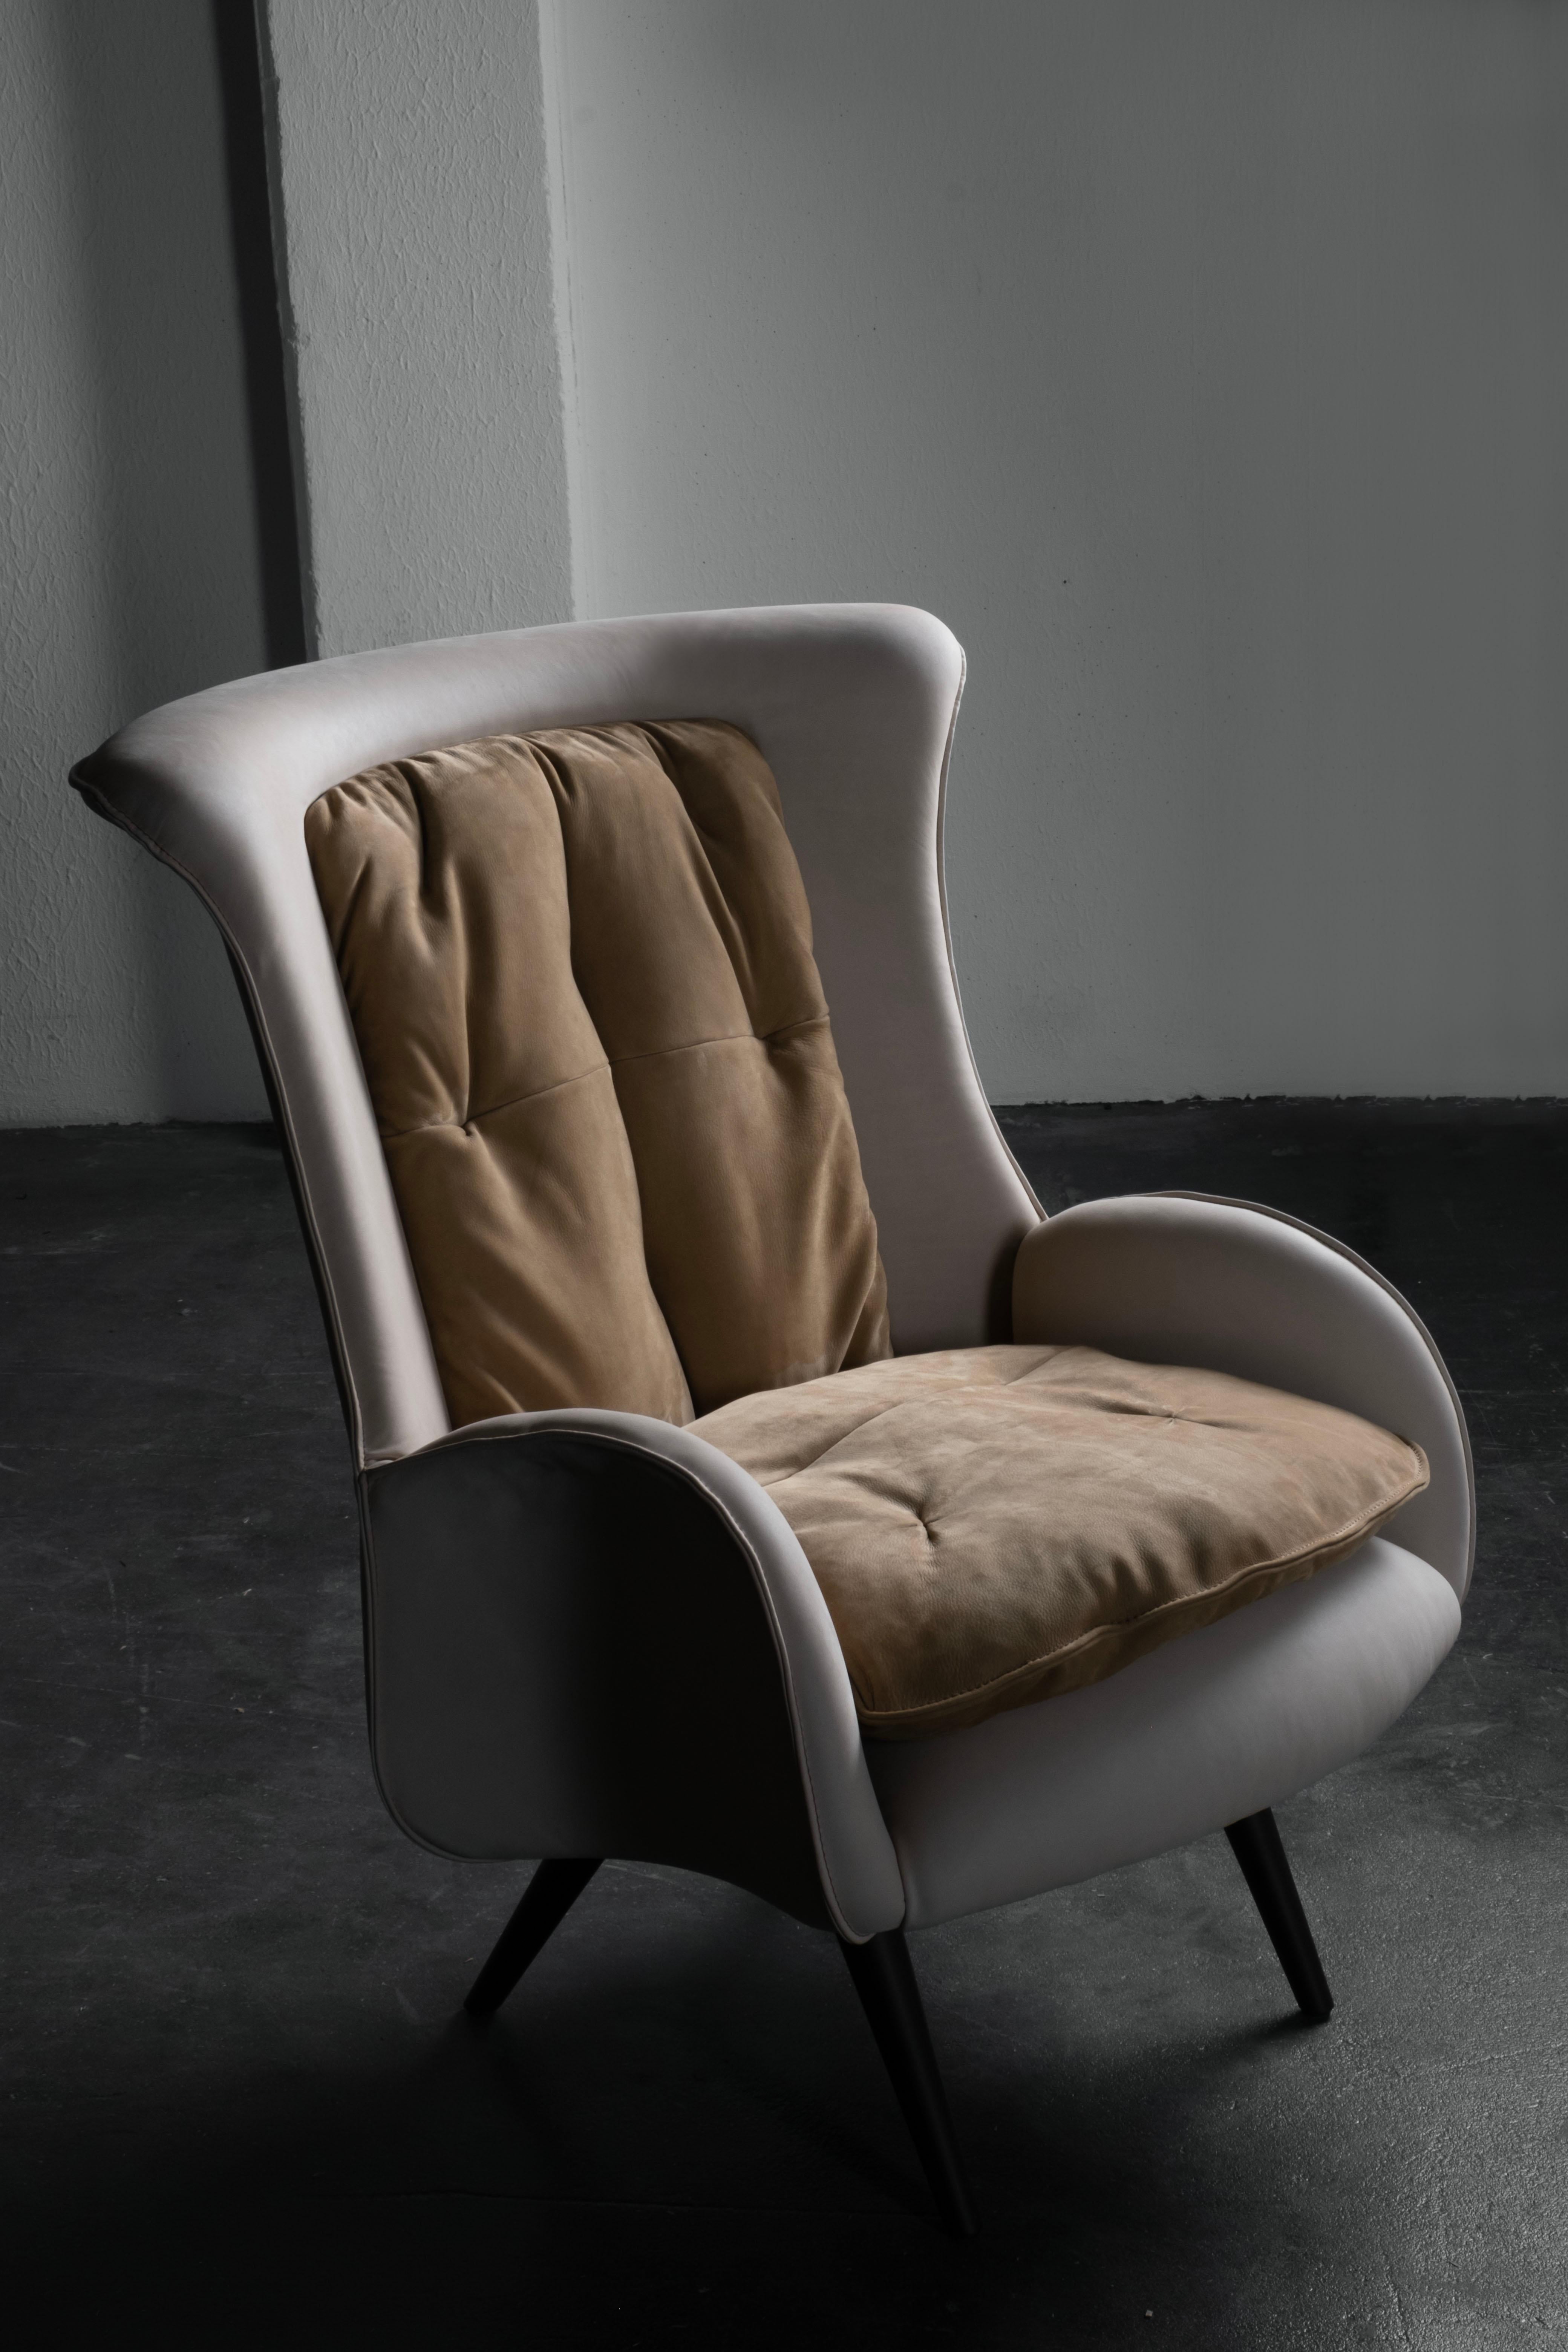 Barão Lounge Chair, Contemporary Collection, Handcrafted in Portugal - Europe by Greenapple.

The Barão leather lounge chair draws inspiration from the meticulous craftsmanship of shoemakers. Upholstered in Italian leather with visible contrast